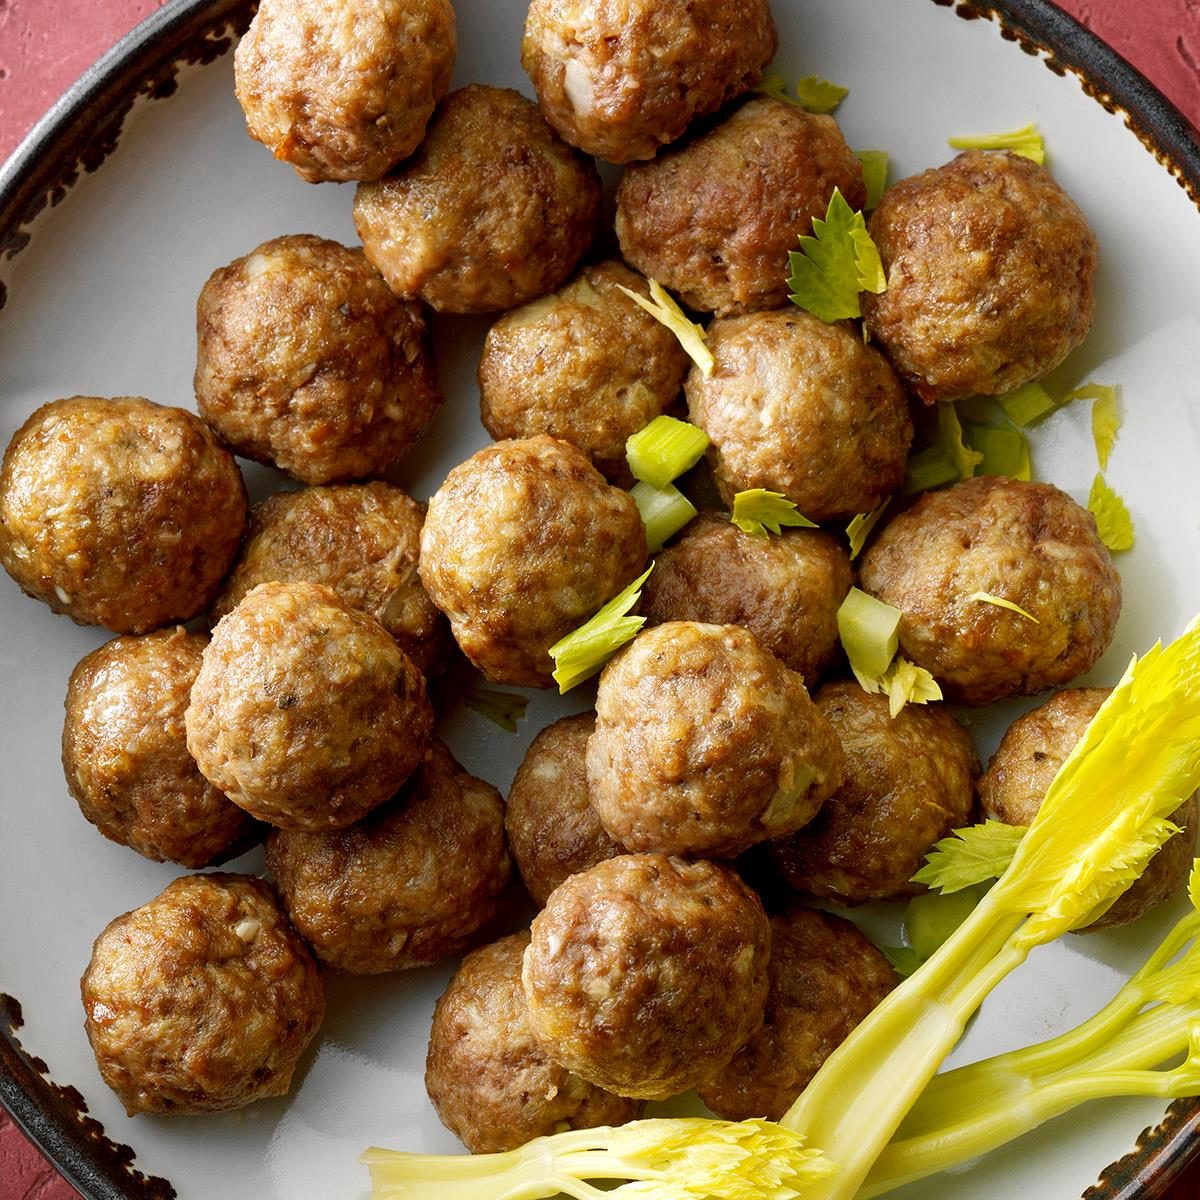 https://www.tasteofhome.com/wp-content/uploads/2019/12/Quick-and-Simple-Meatballs_EXPS_TOHSO22_249170_DR_05_12_10b.jpg